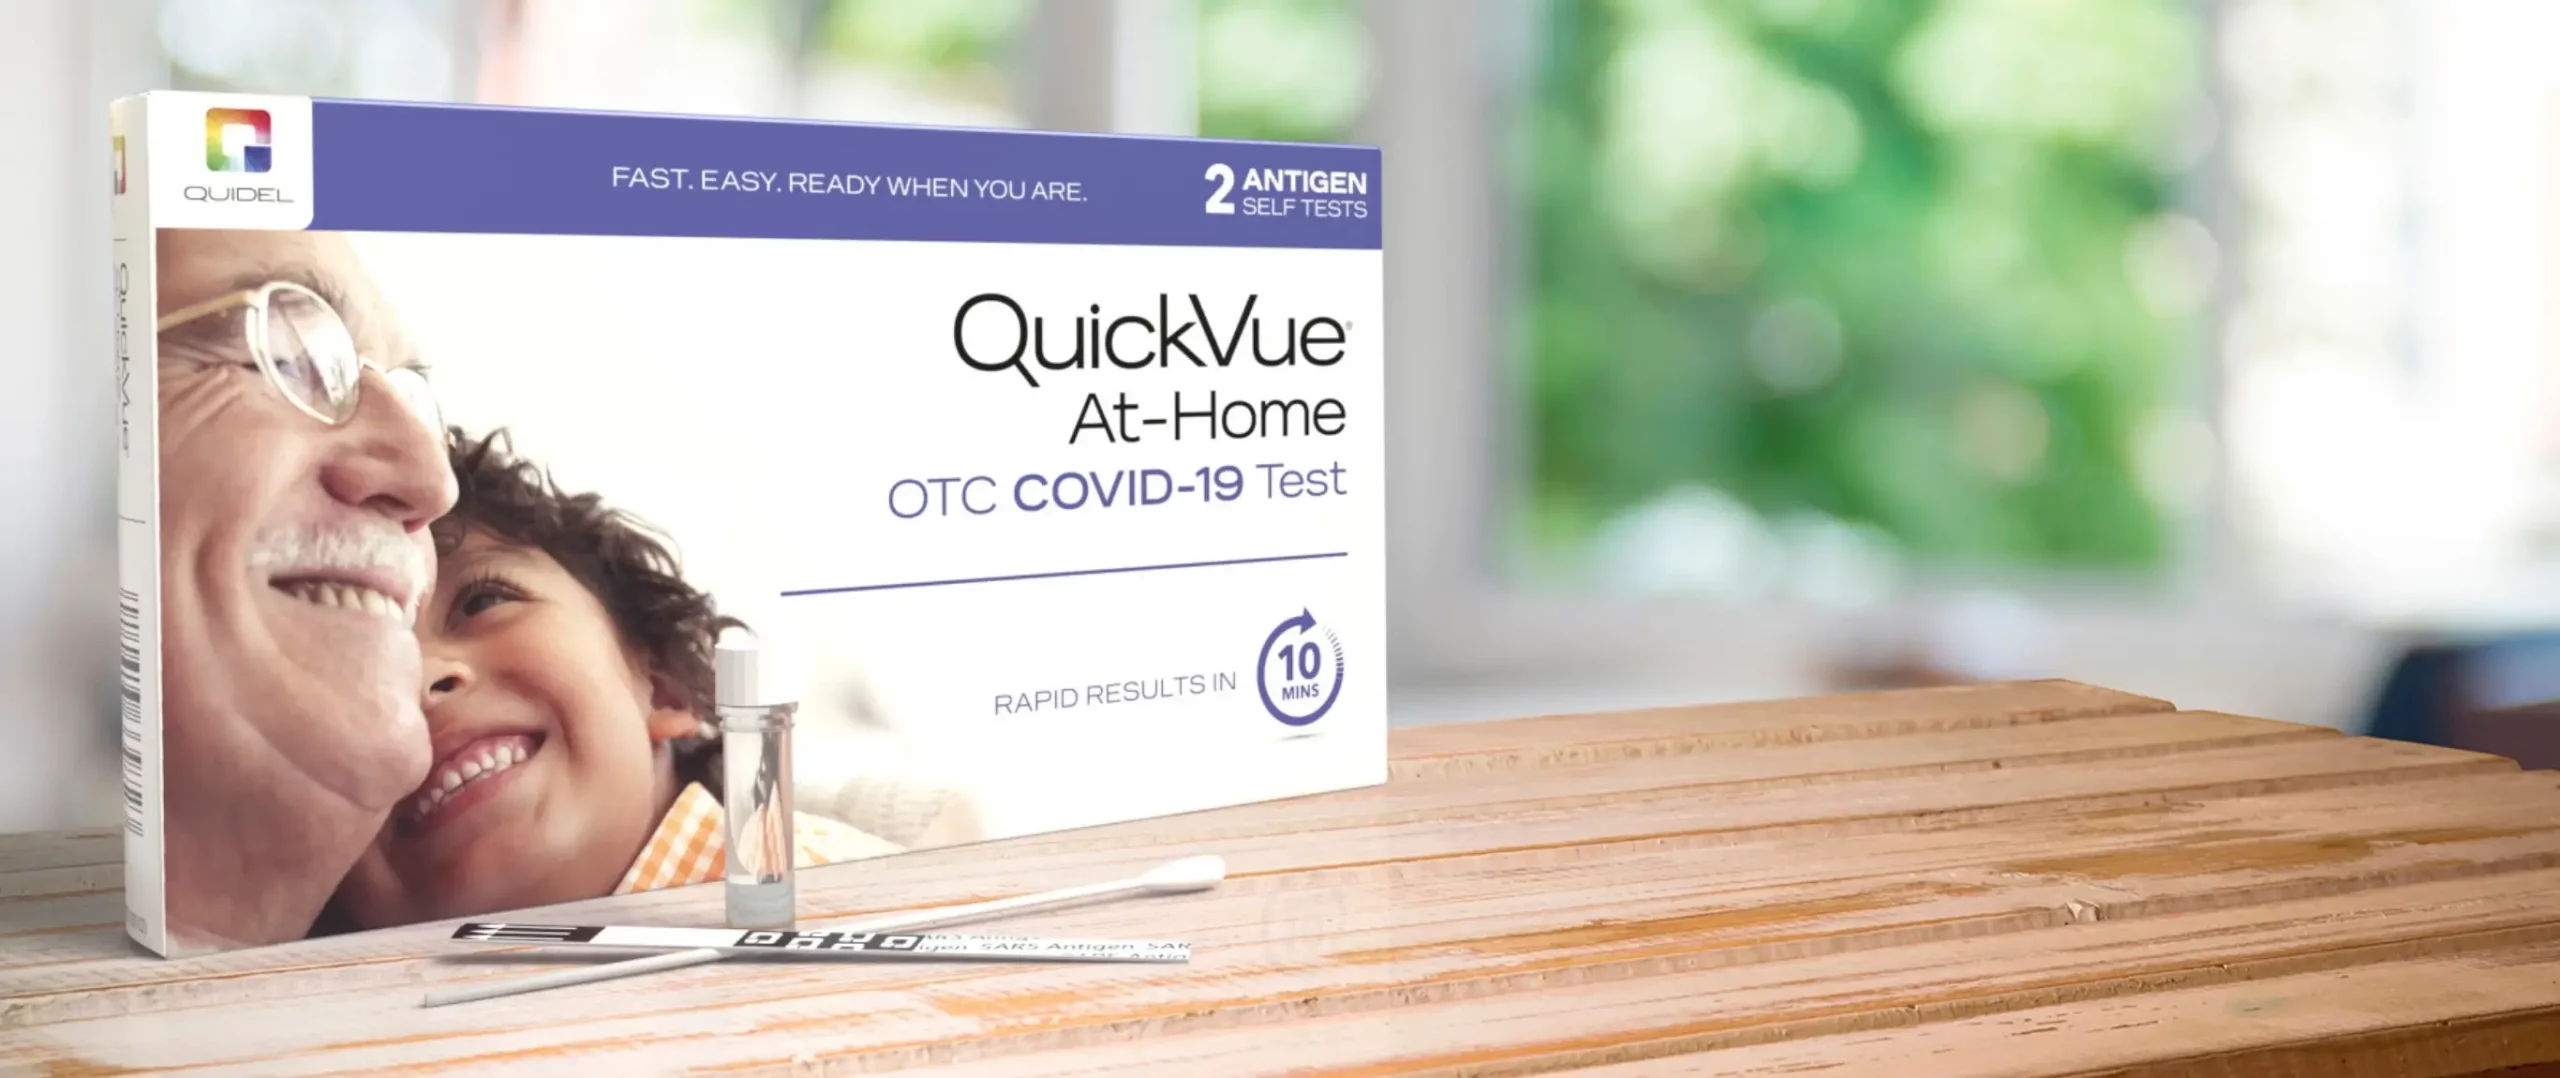 Image of QuickVue At-Home OTC COVID-19 Test in packaging